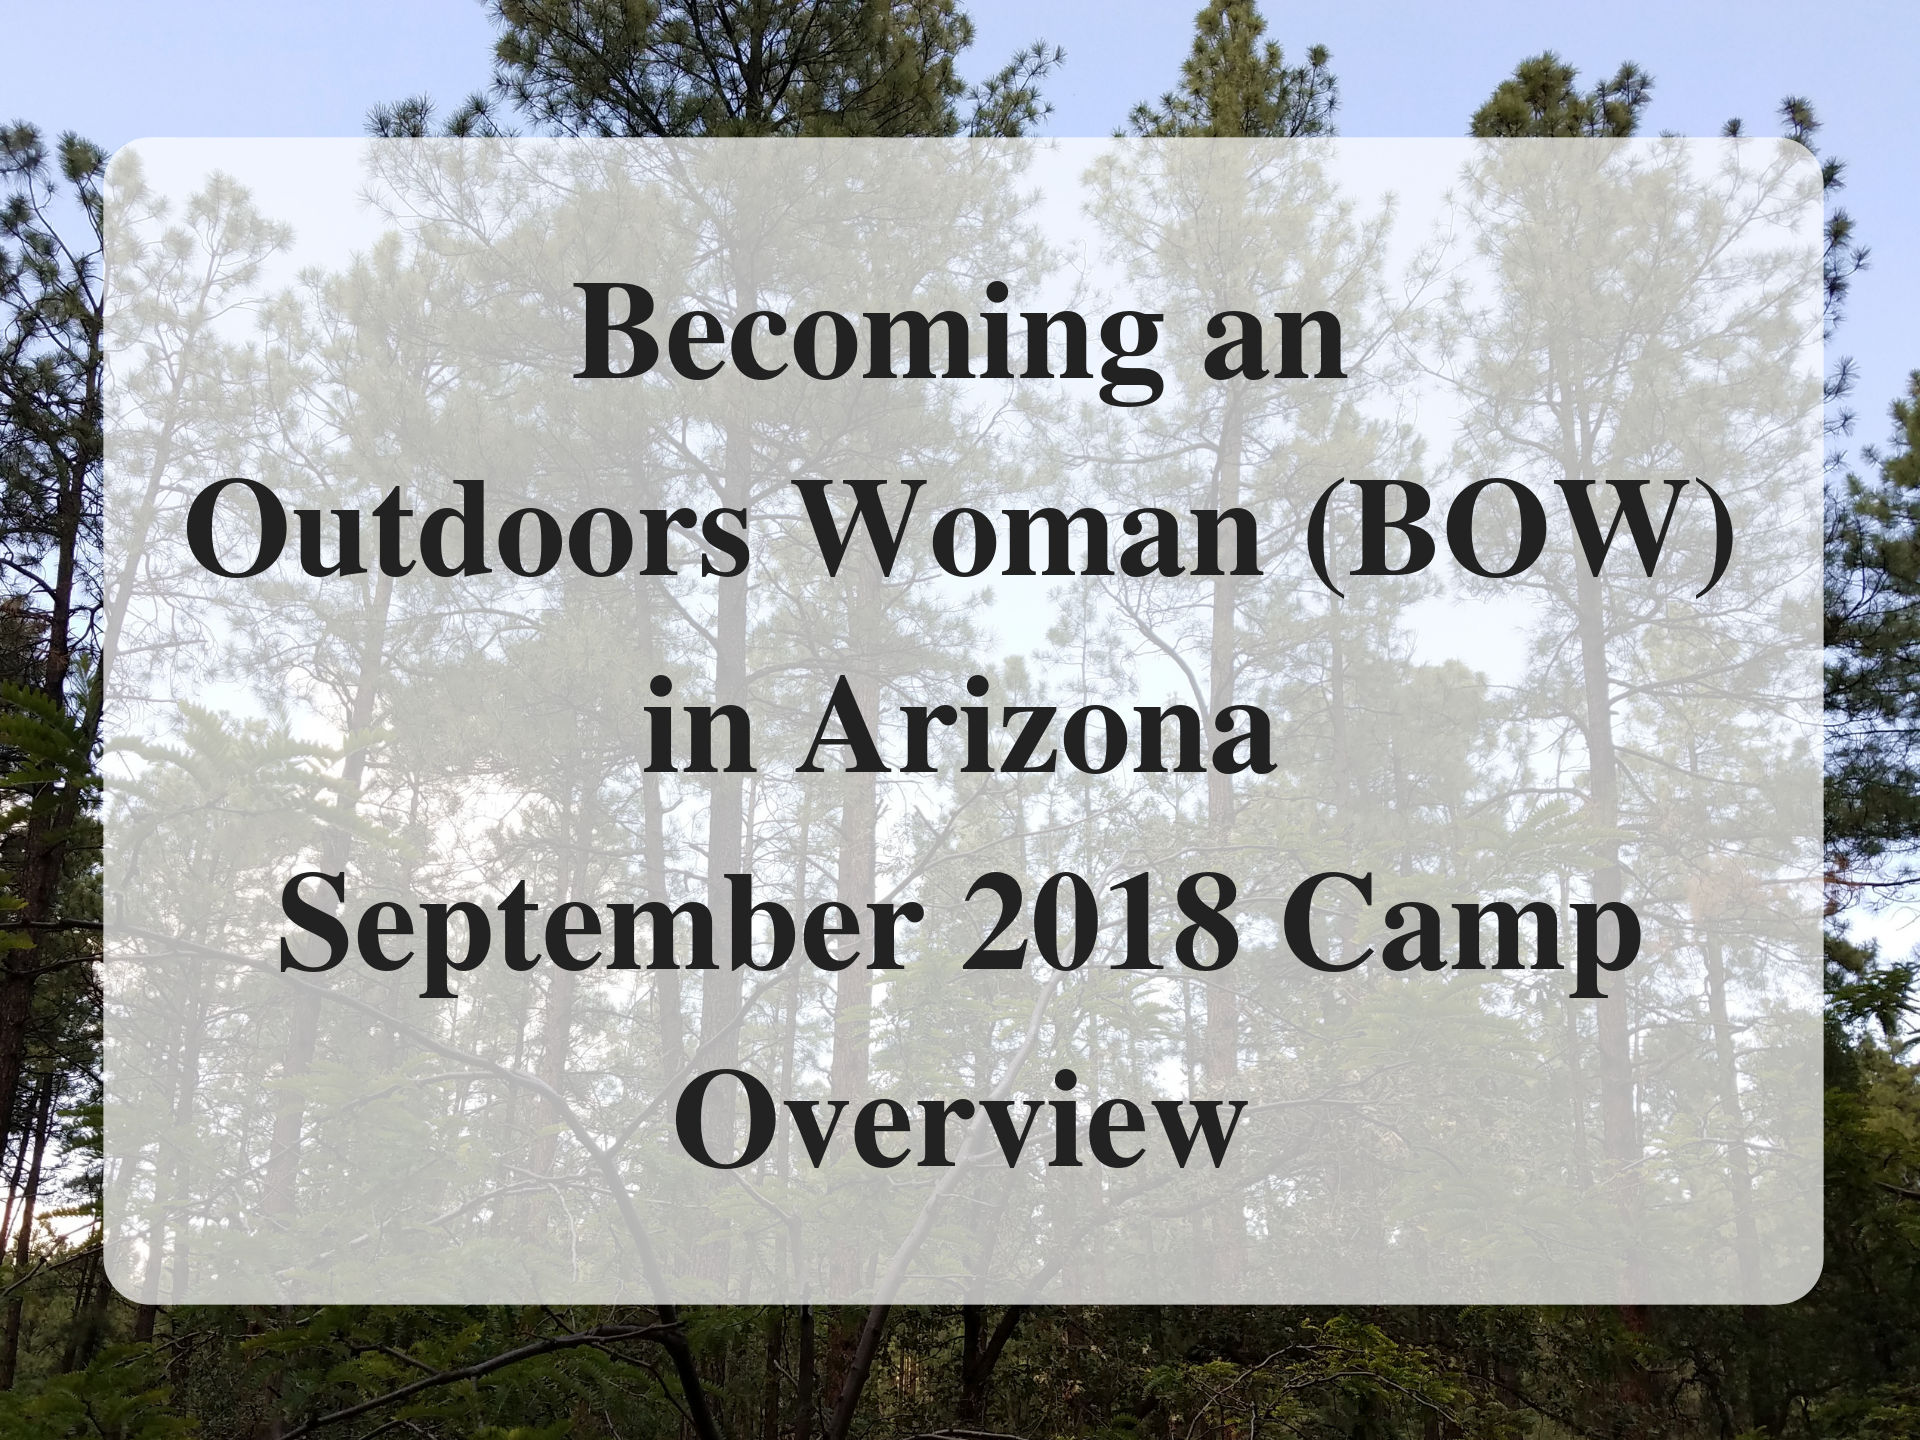 Becoming an Outdoors Woman (BOW) in Arizona September 2018 Camp Overview1